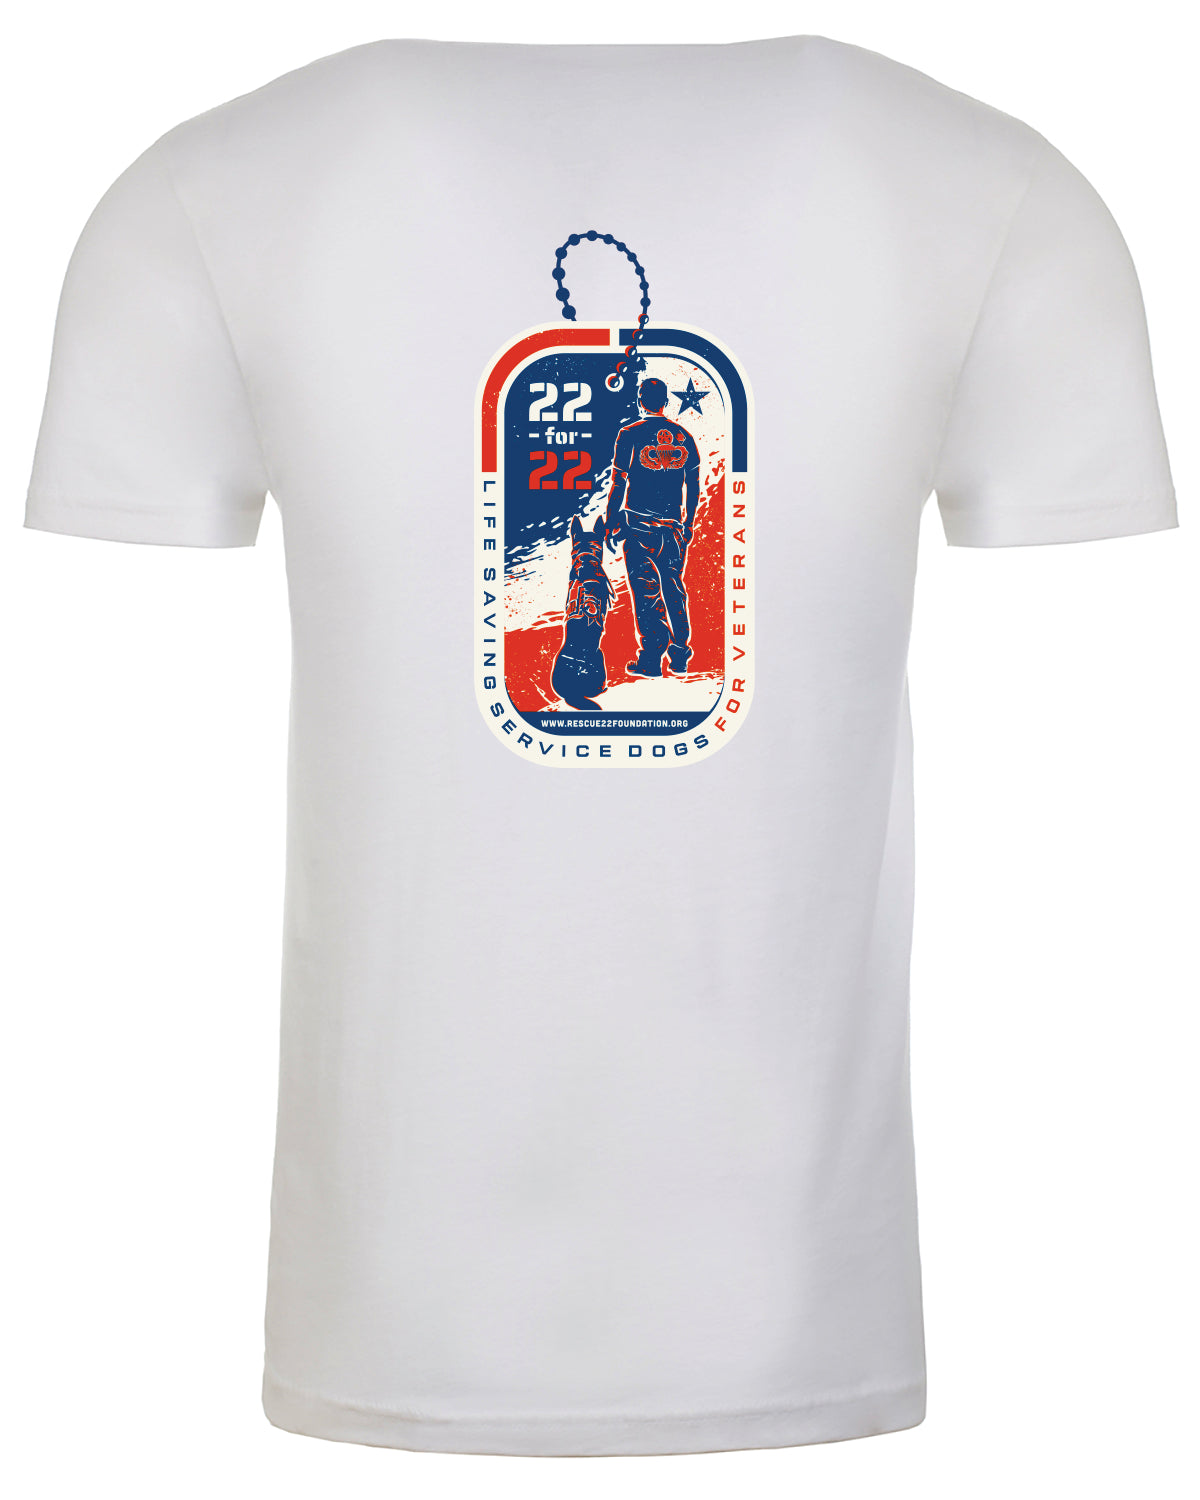 22 for 22 T-shirt